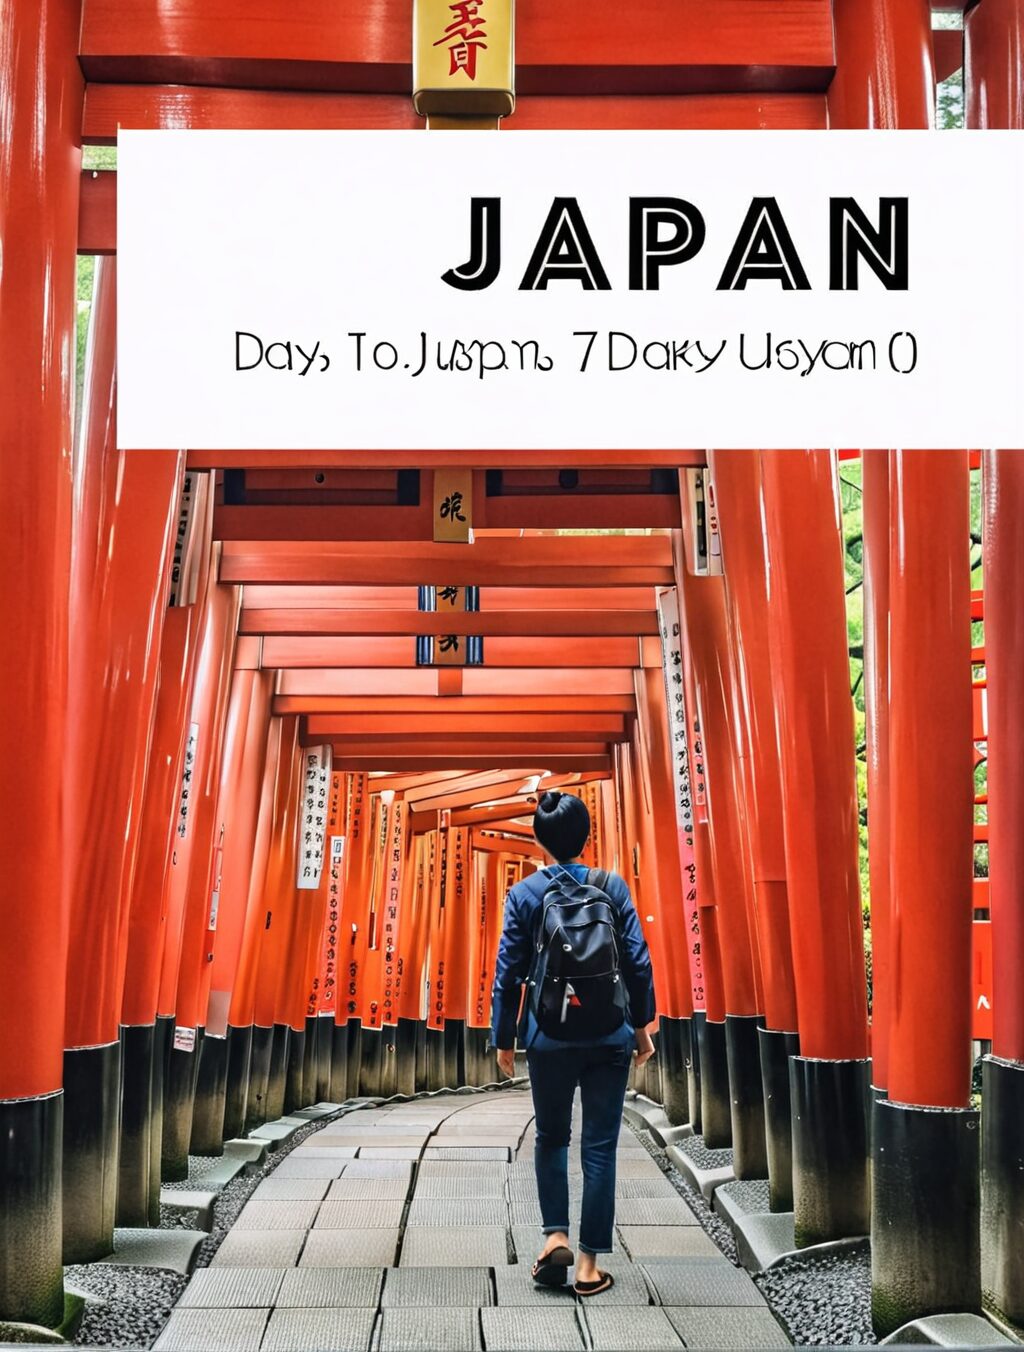 planning a 10 day trip to japan